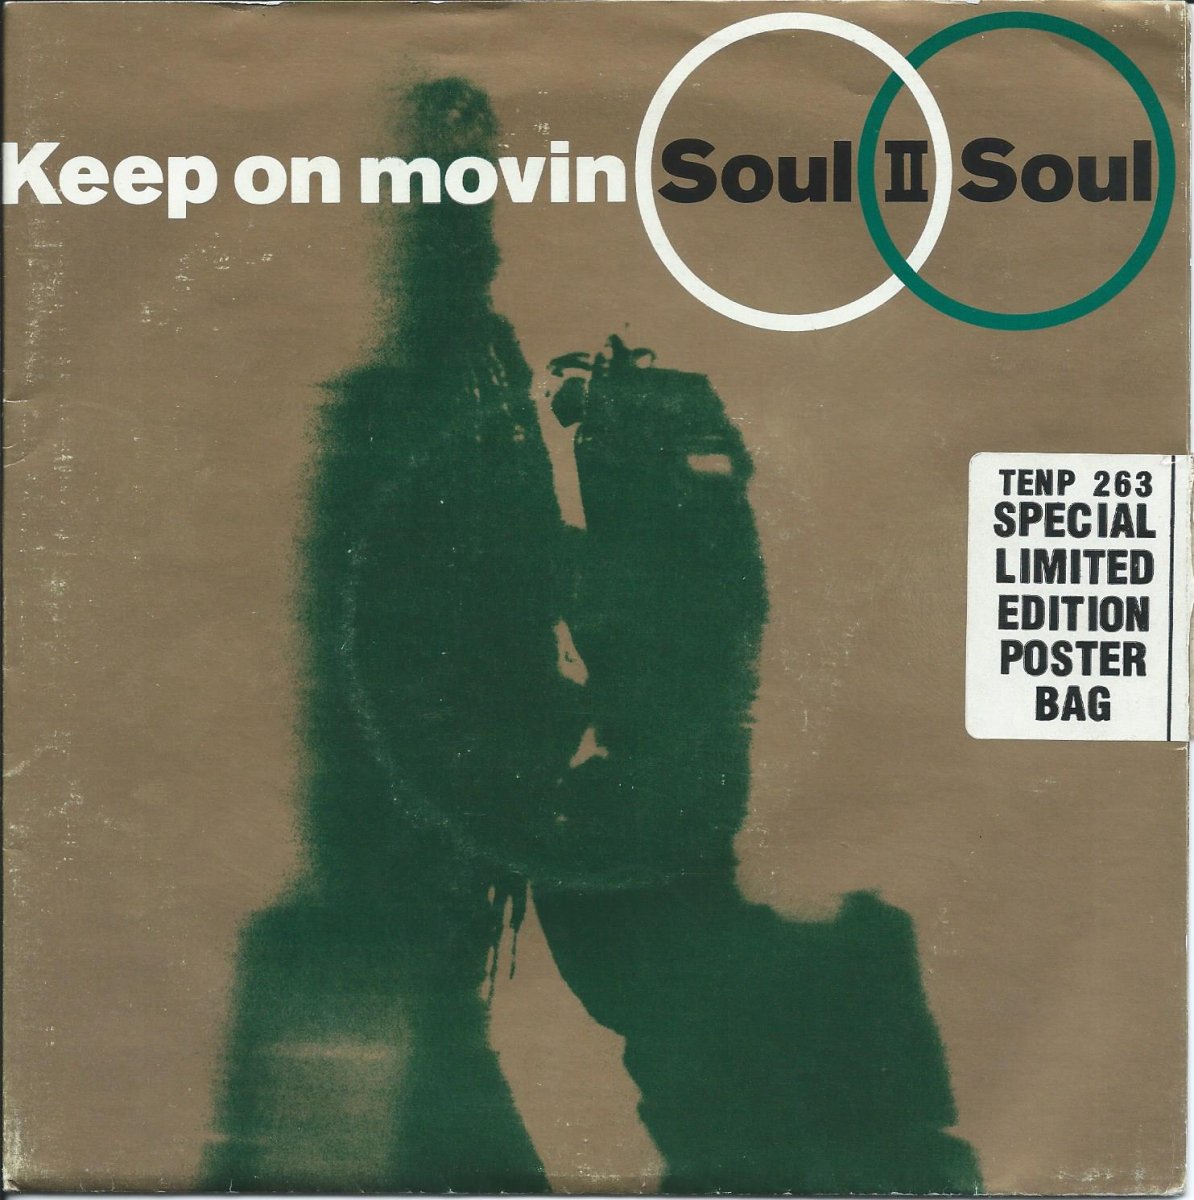 SOUL II SOUL / KEEP ON MOVIN - SPECIAL LIMITED EDITION POSTER BAG (7